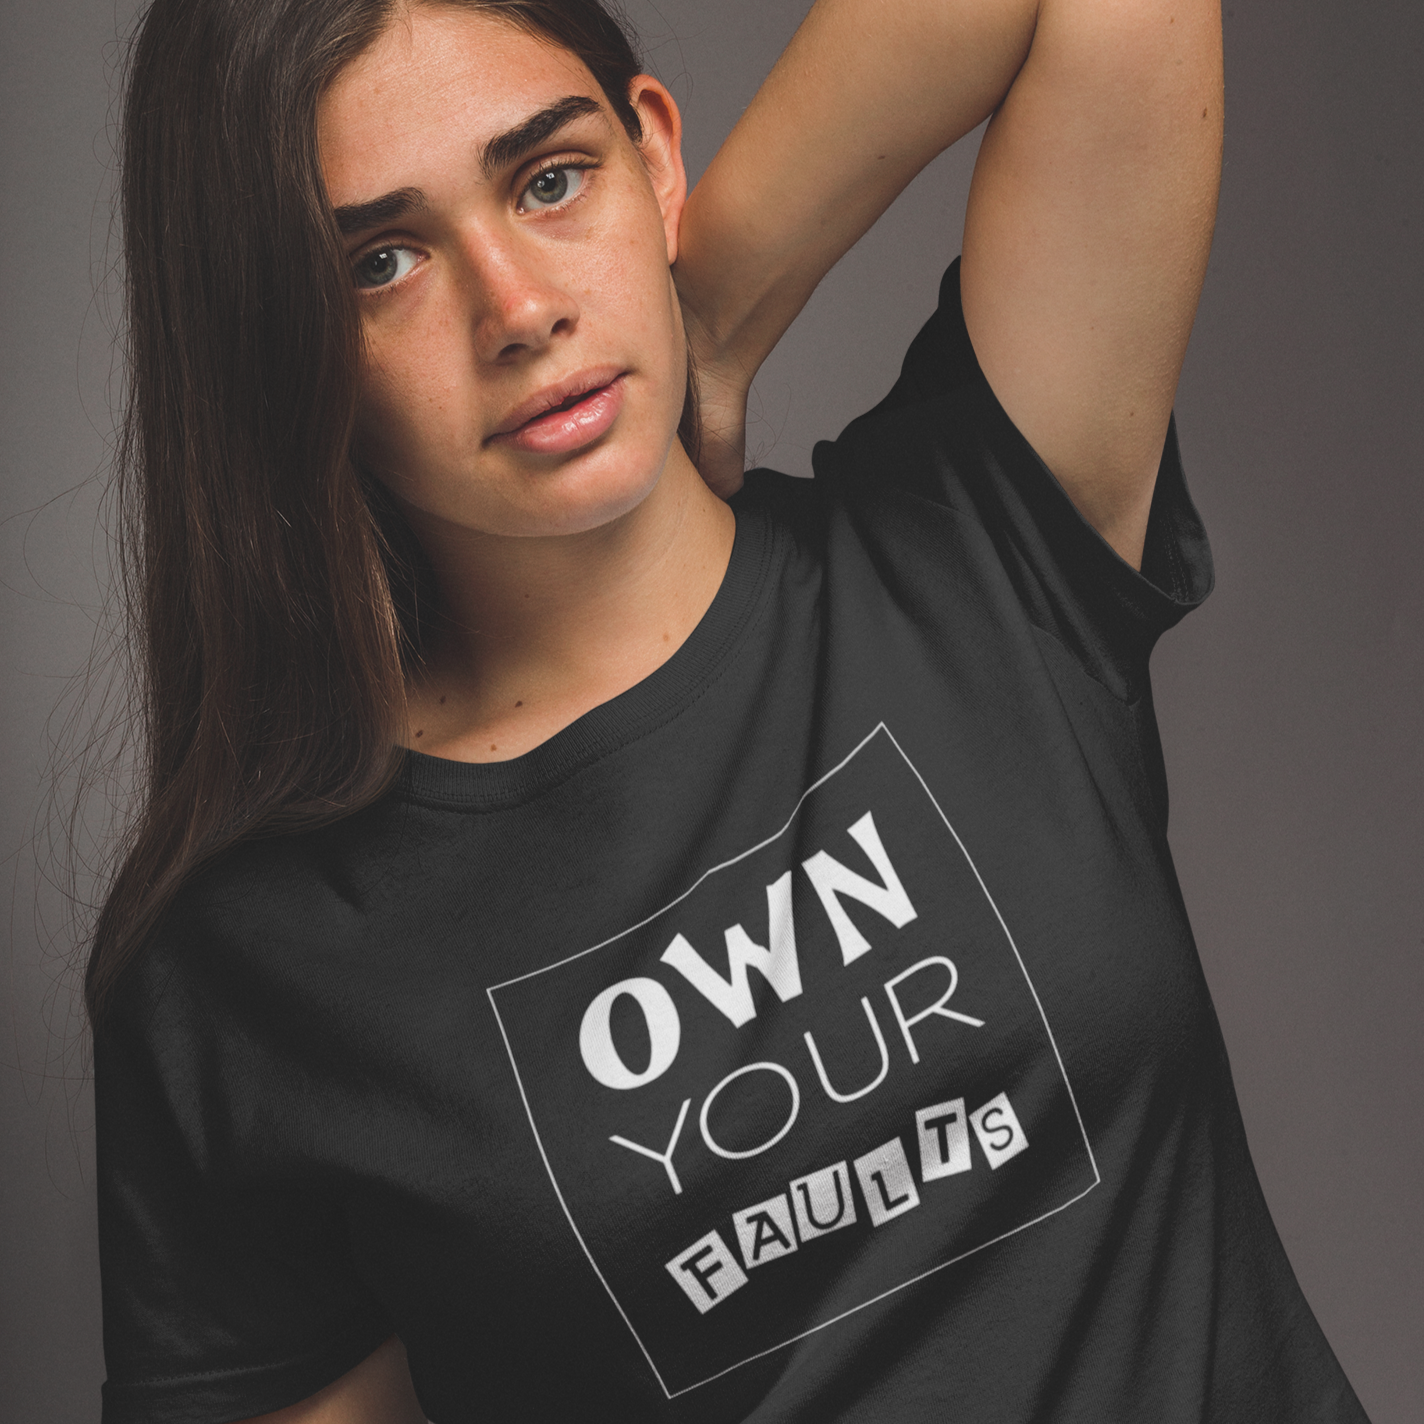 Own Your Faults Short-Sleeve Unisex T-Shirt